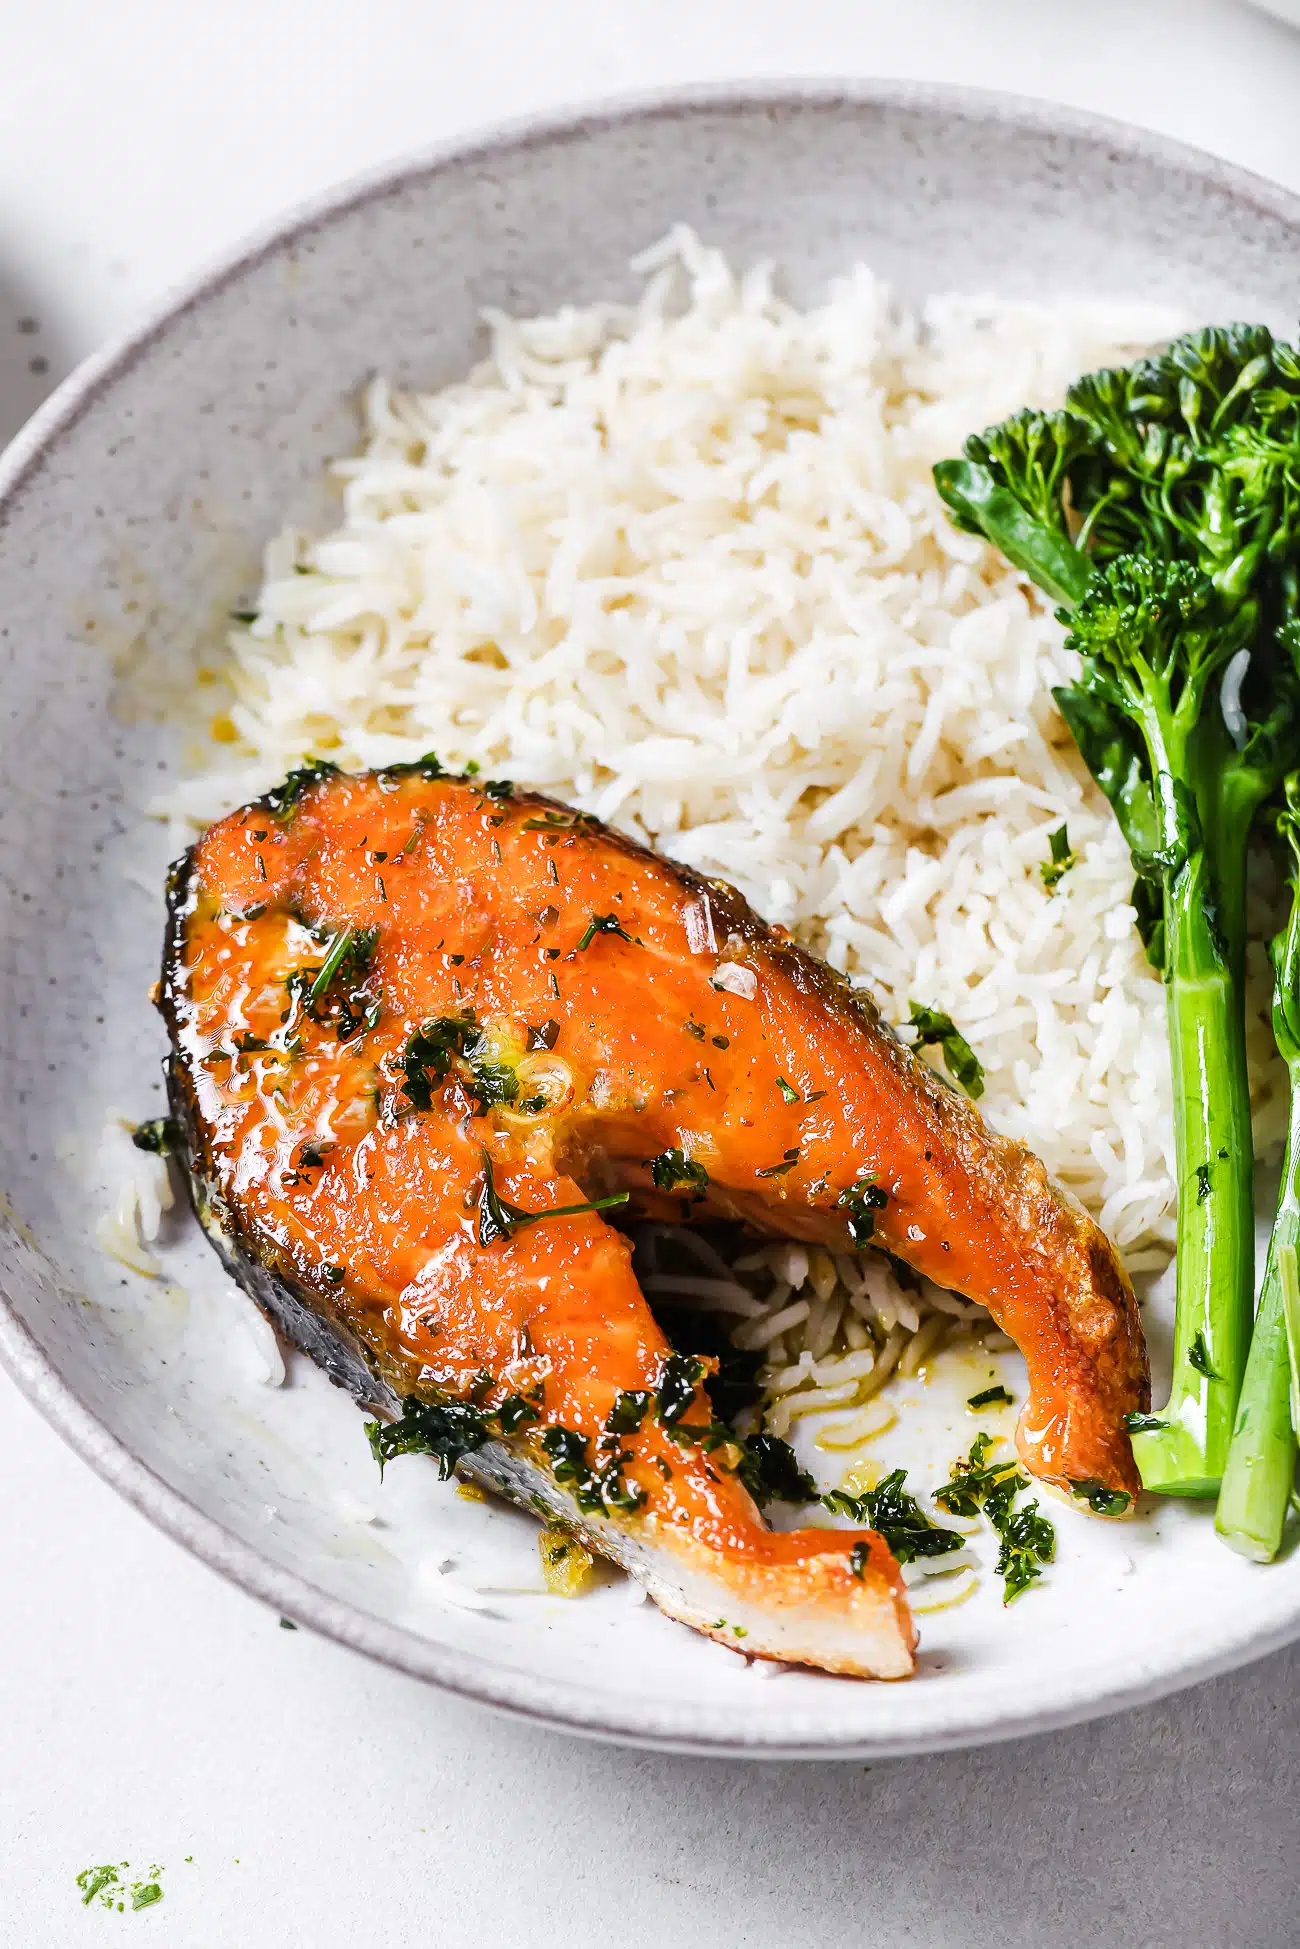 Garlic butter salmon steaks on a plate with rice and green vegetables.